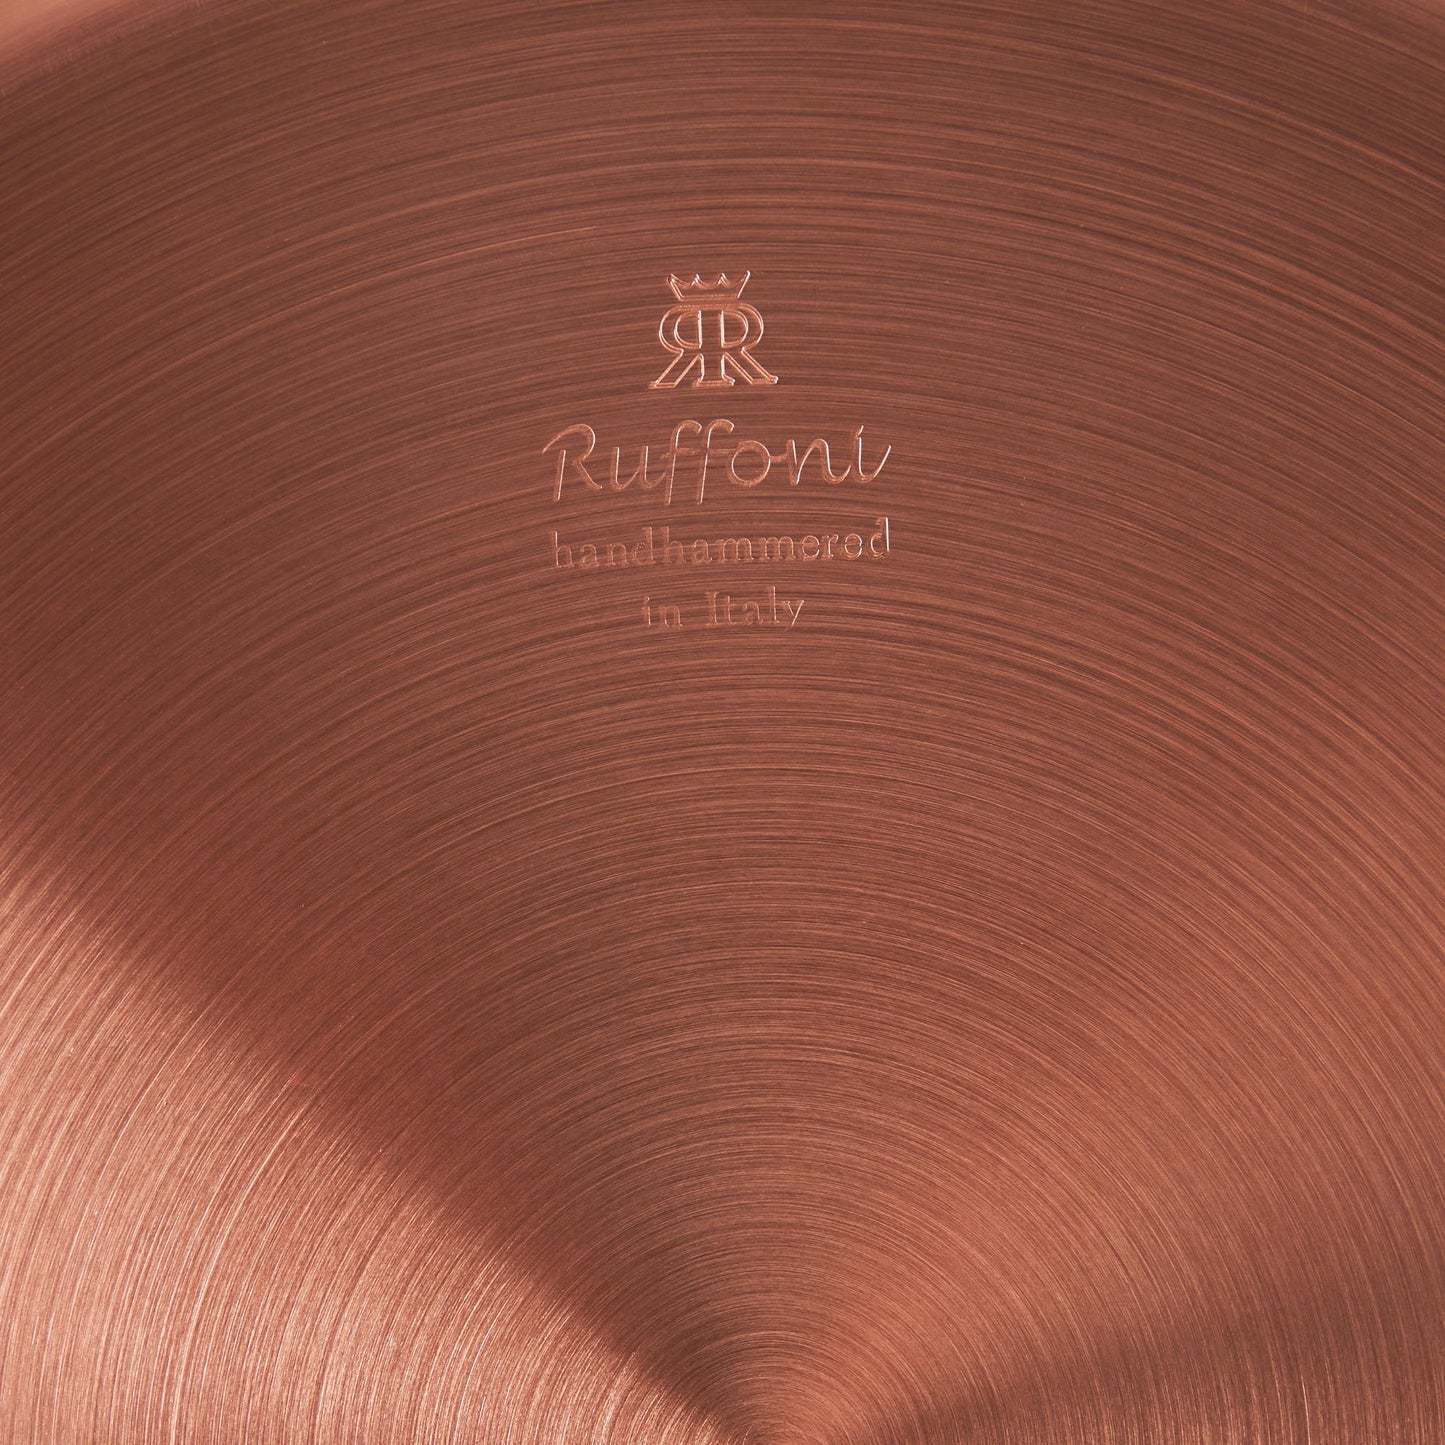 Ruffoni Made in Italy brand logo stamped under copper braiser for authenticity